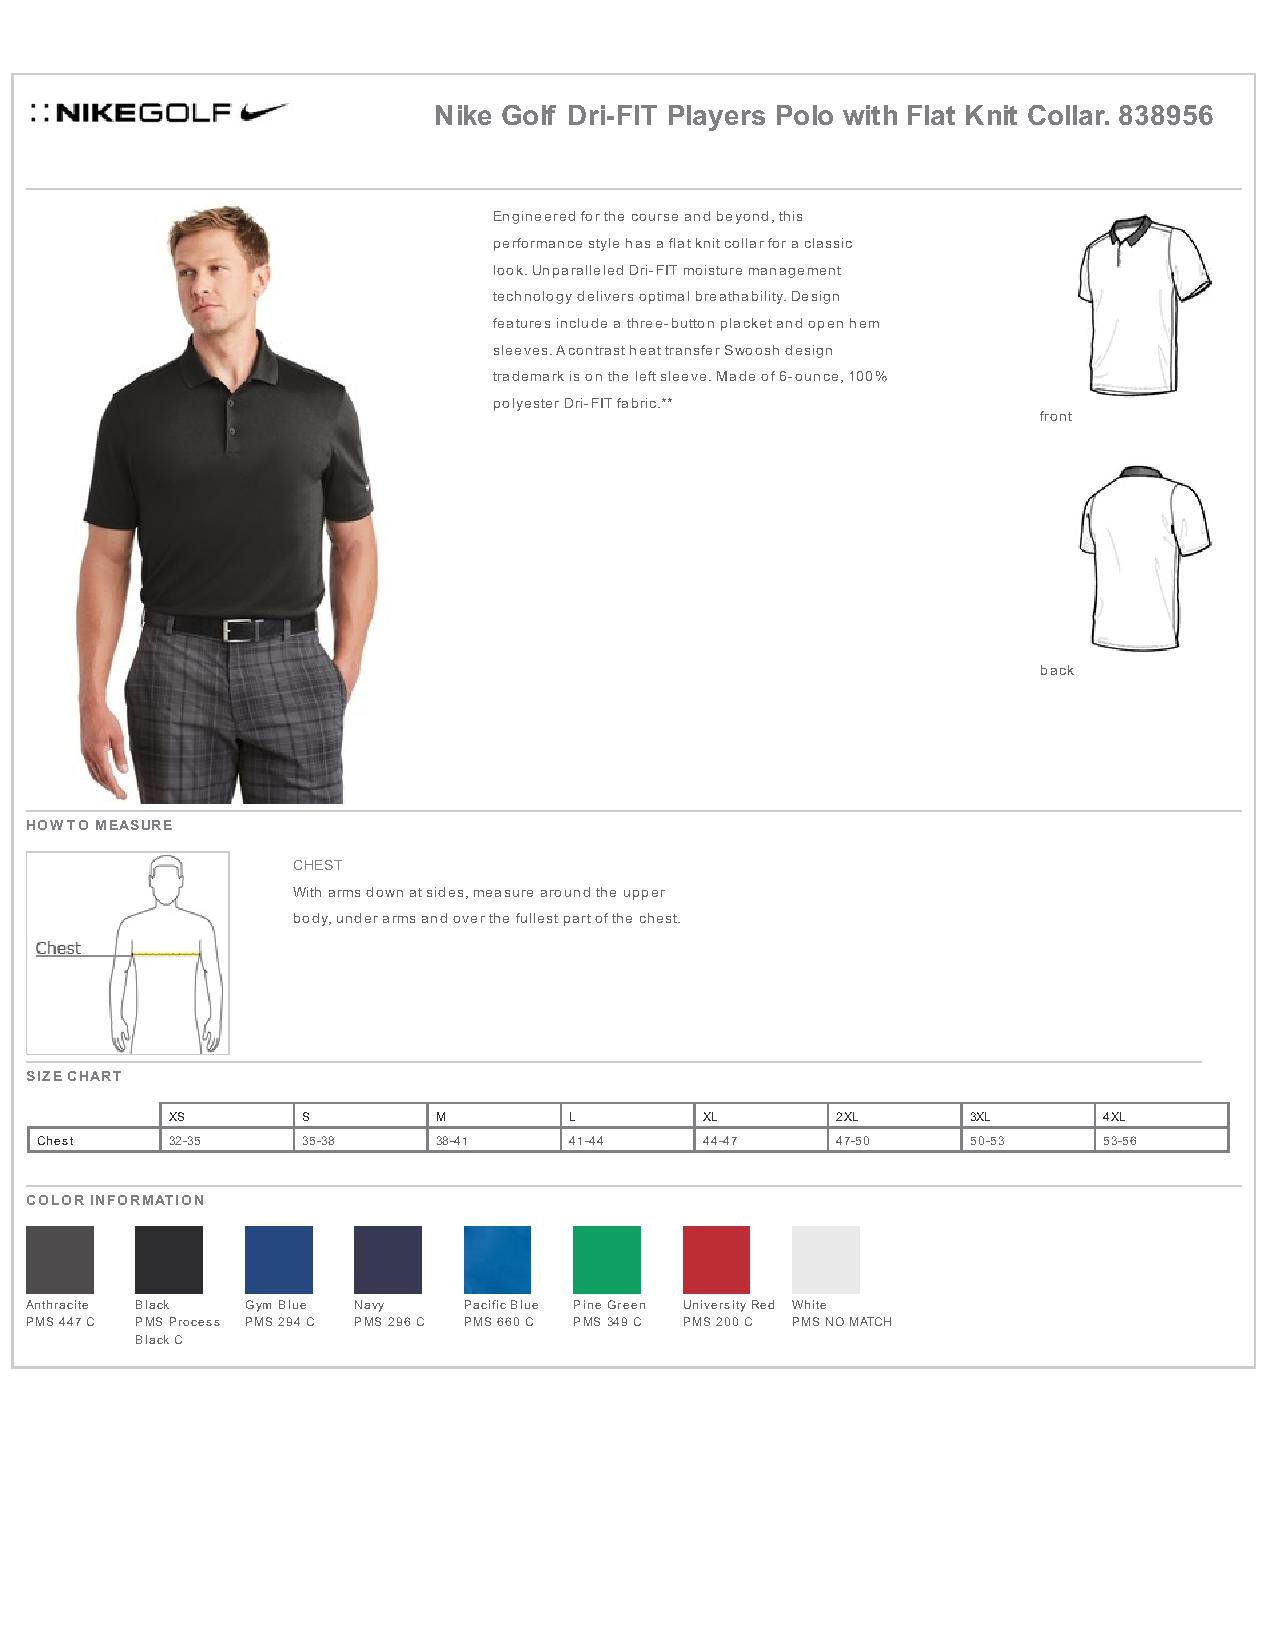 Embroider Nike Golf 838956 - Dri-FIT Players Polo with Flat Knit Collar ...